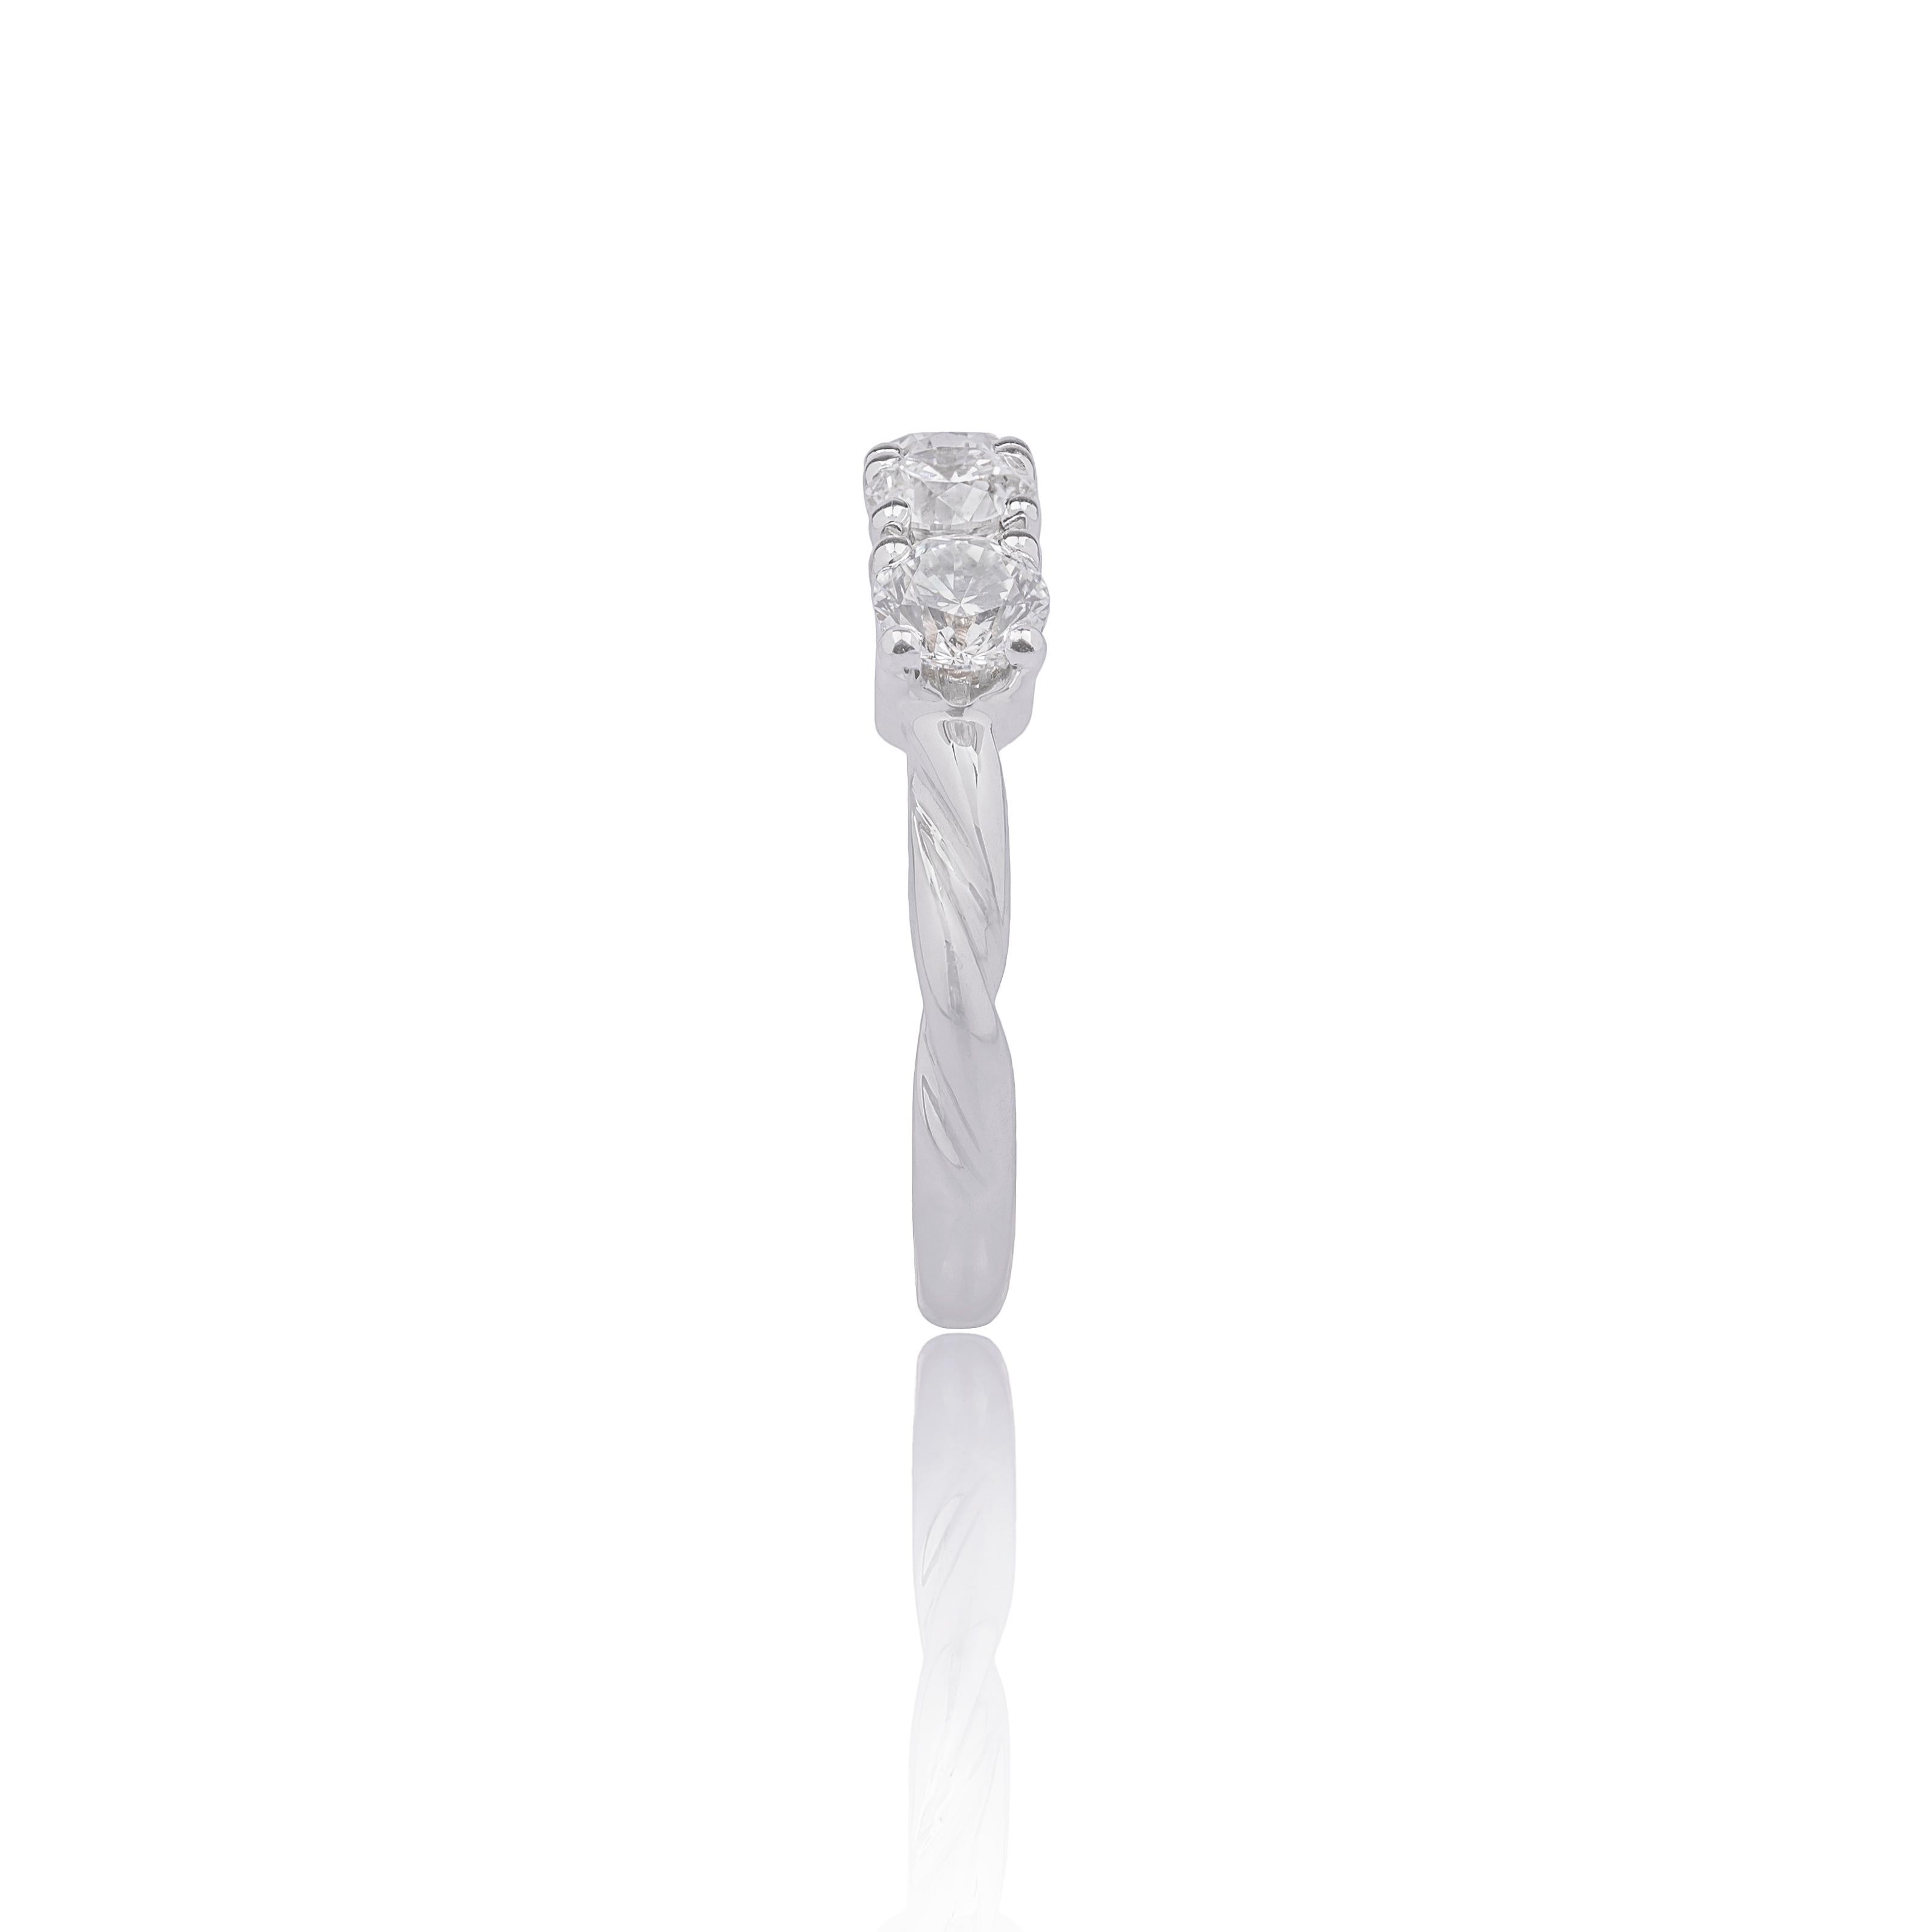 For Sale:  1.28ct Brilliant Cut Diamonds and 18k White Gold Trilogy Ring  3